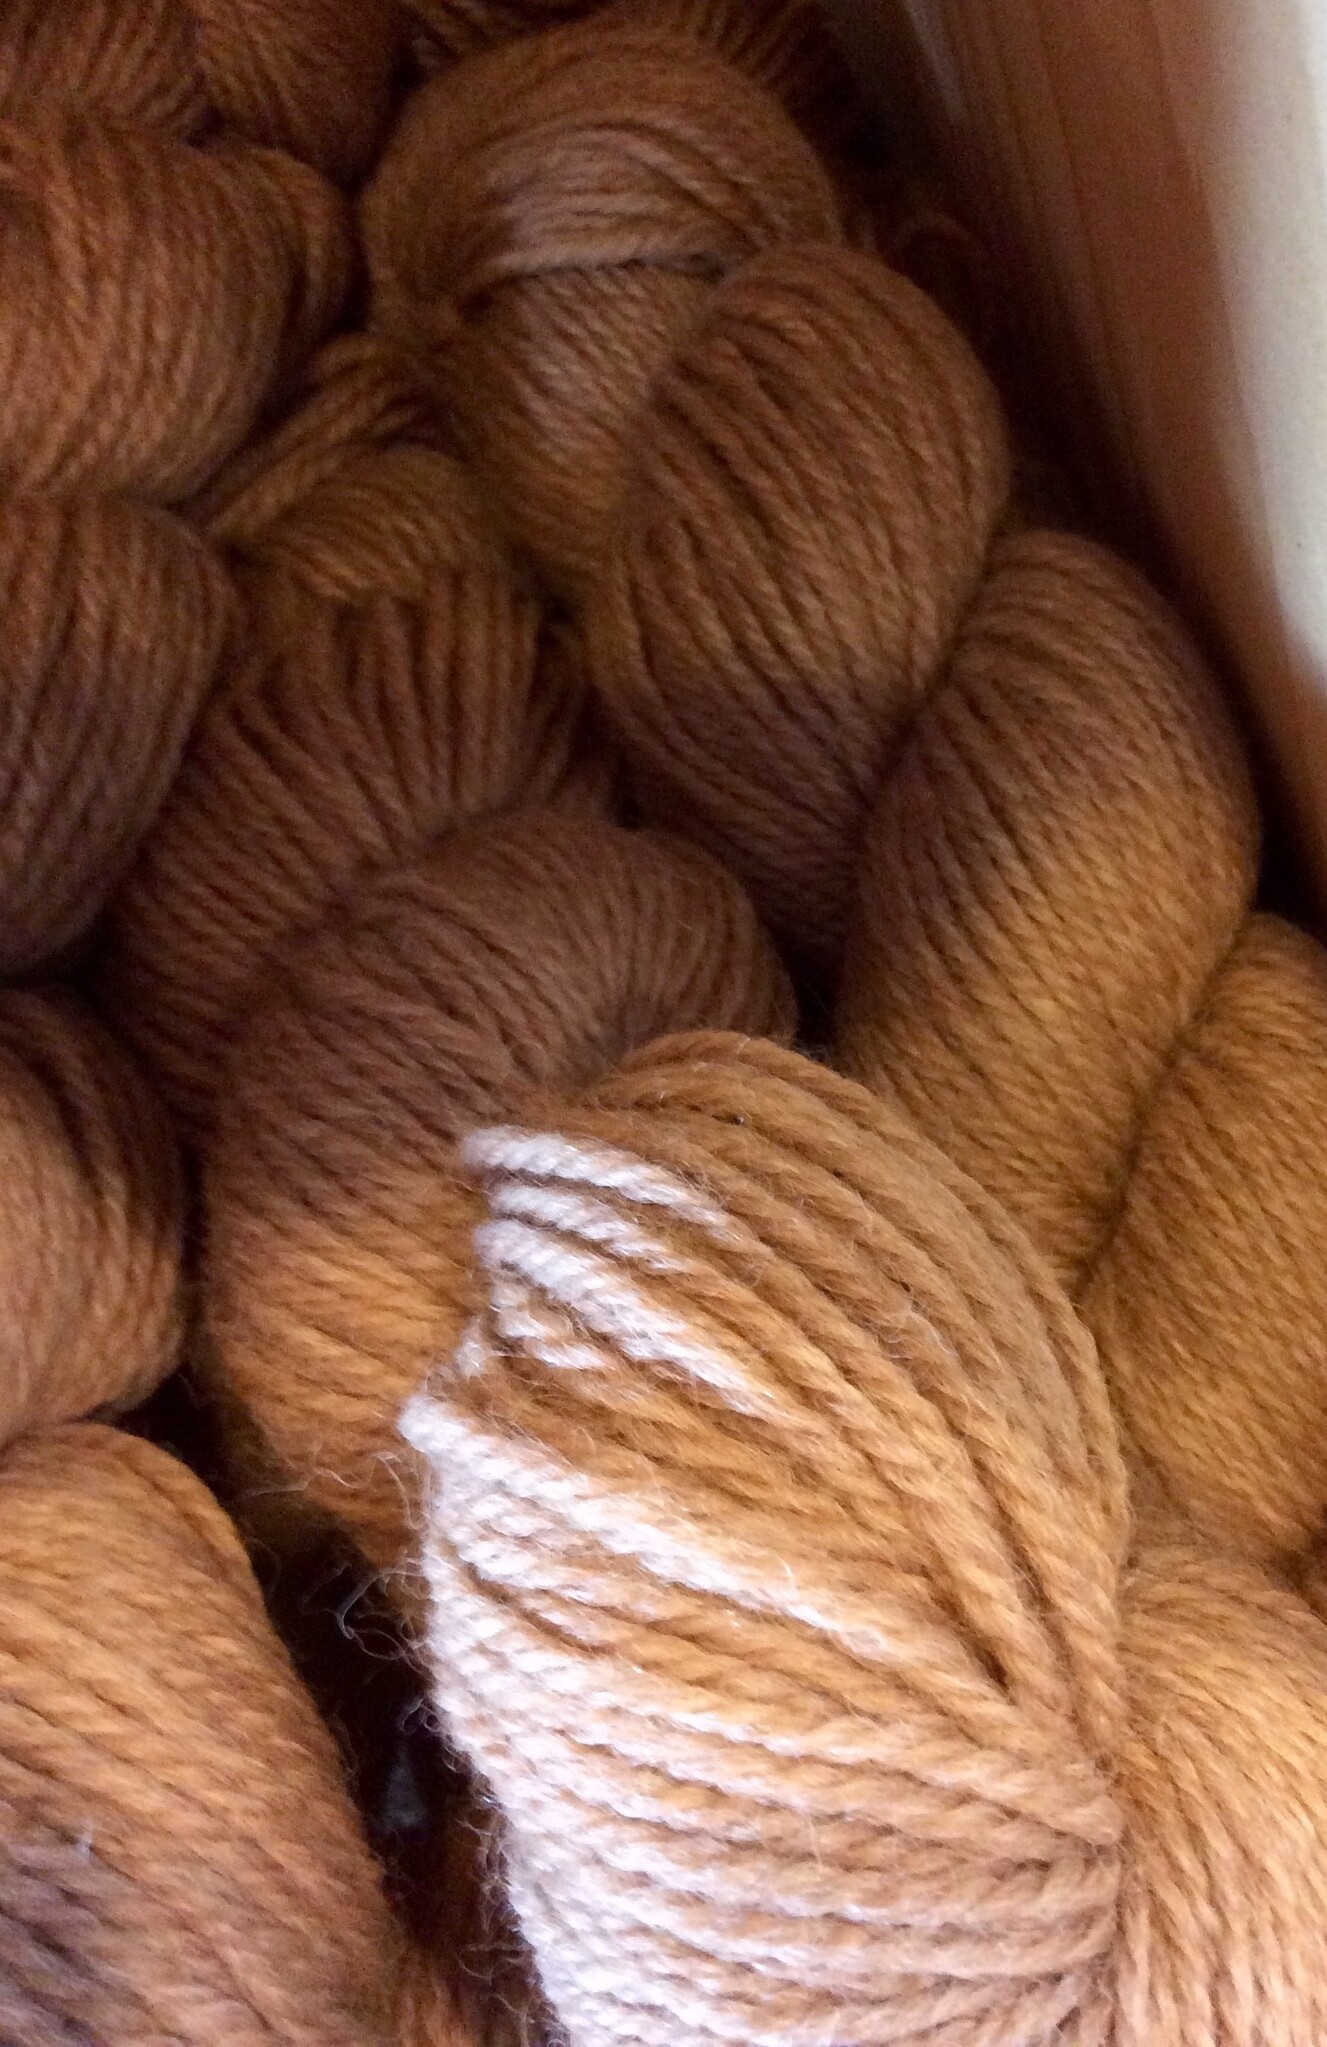 Cassis/Hennesey 3 Ply Sport 250 Yds 2.8 Oz